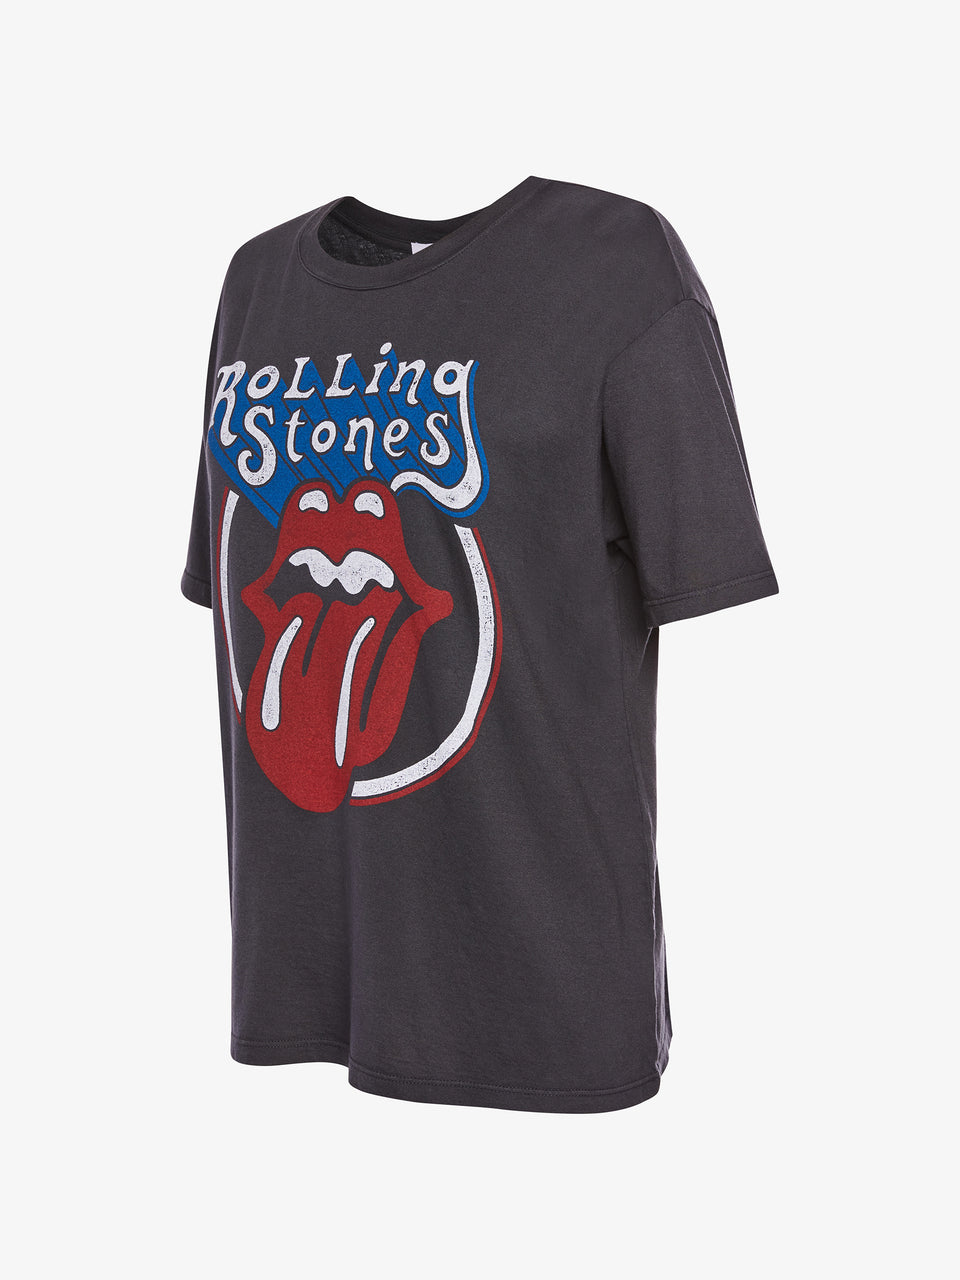 daydreamer_rolling_stones_tee_ash